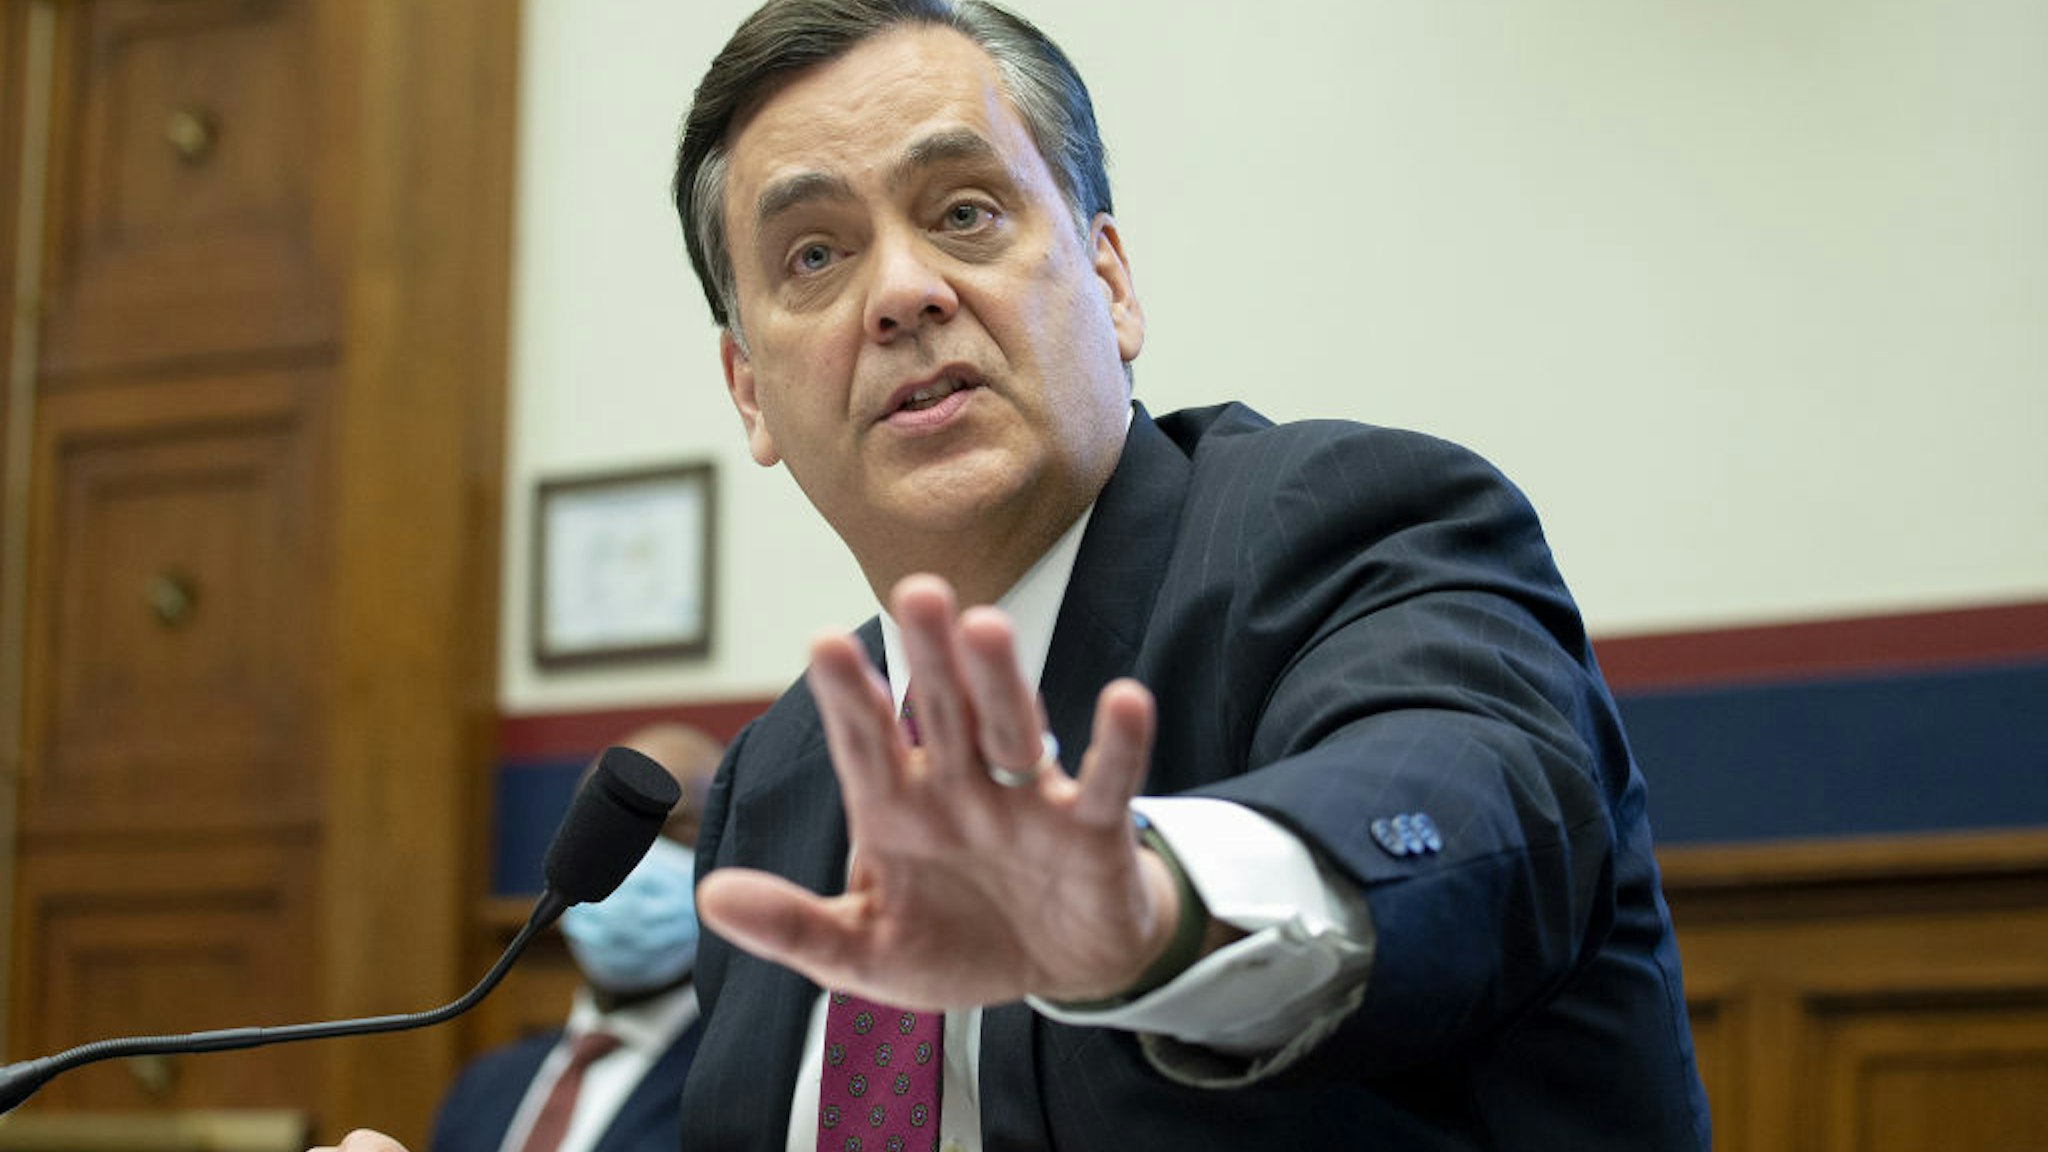 Jonathan Turley, law professor at George Washington University Law School, speaks during a House Natural Resources Committee hearing in Washington, D.C., U.S., on Monday, June 29, 2020. The hearing is titled "U.S. Park Police Attack on Peaceful Protesters at Lafayette Square Park." Photographer: Bonnie Cash/The Hill/Bloomberg via Getty Images